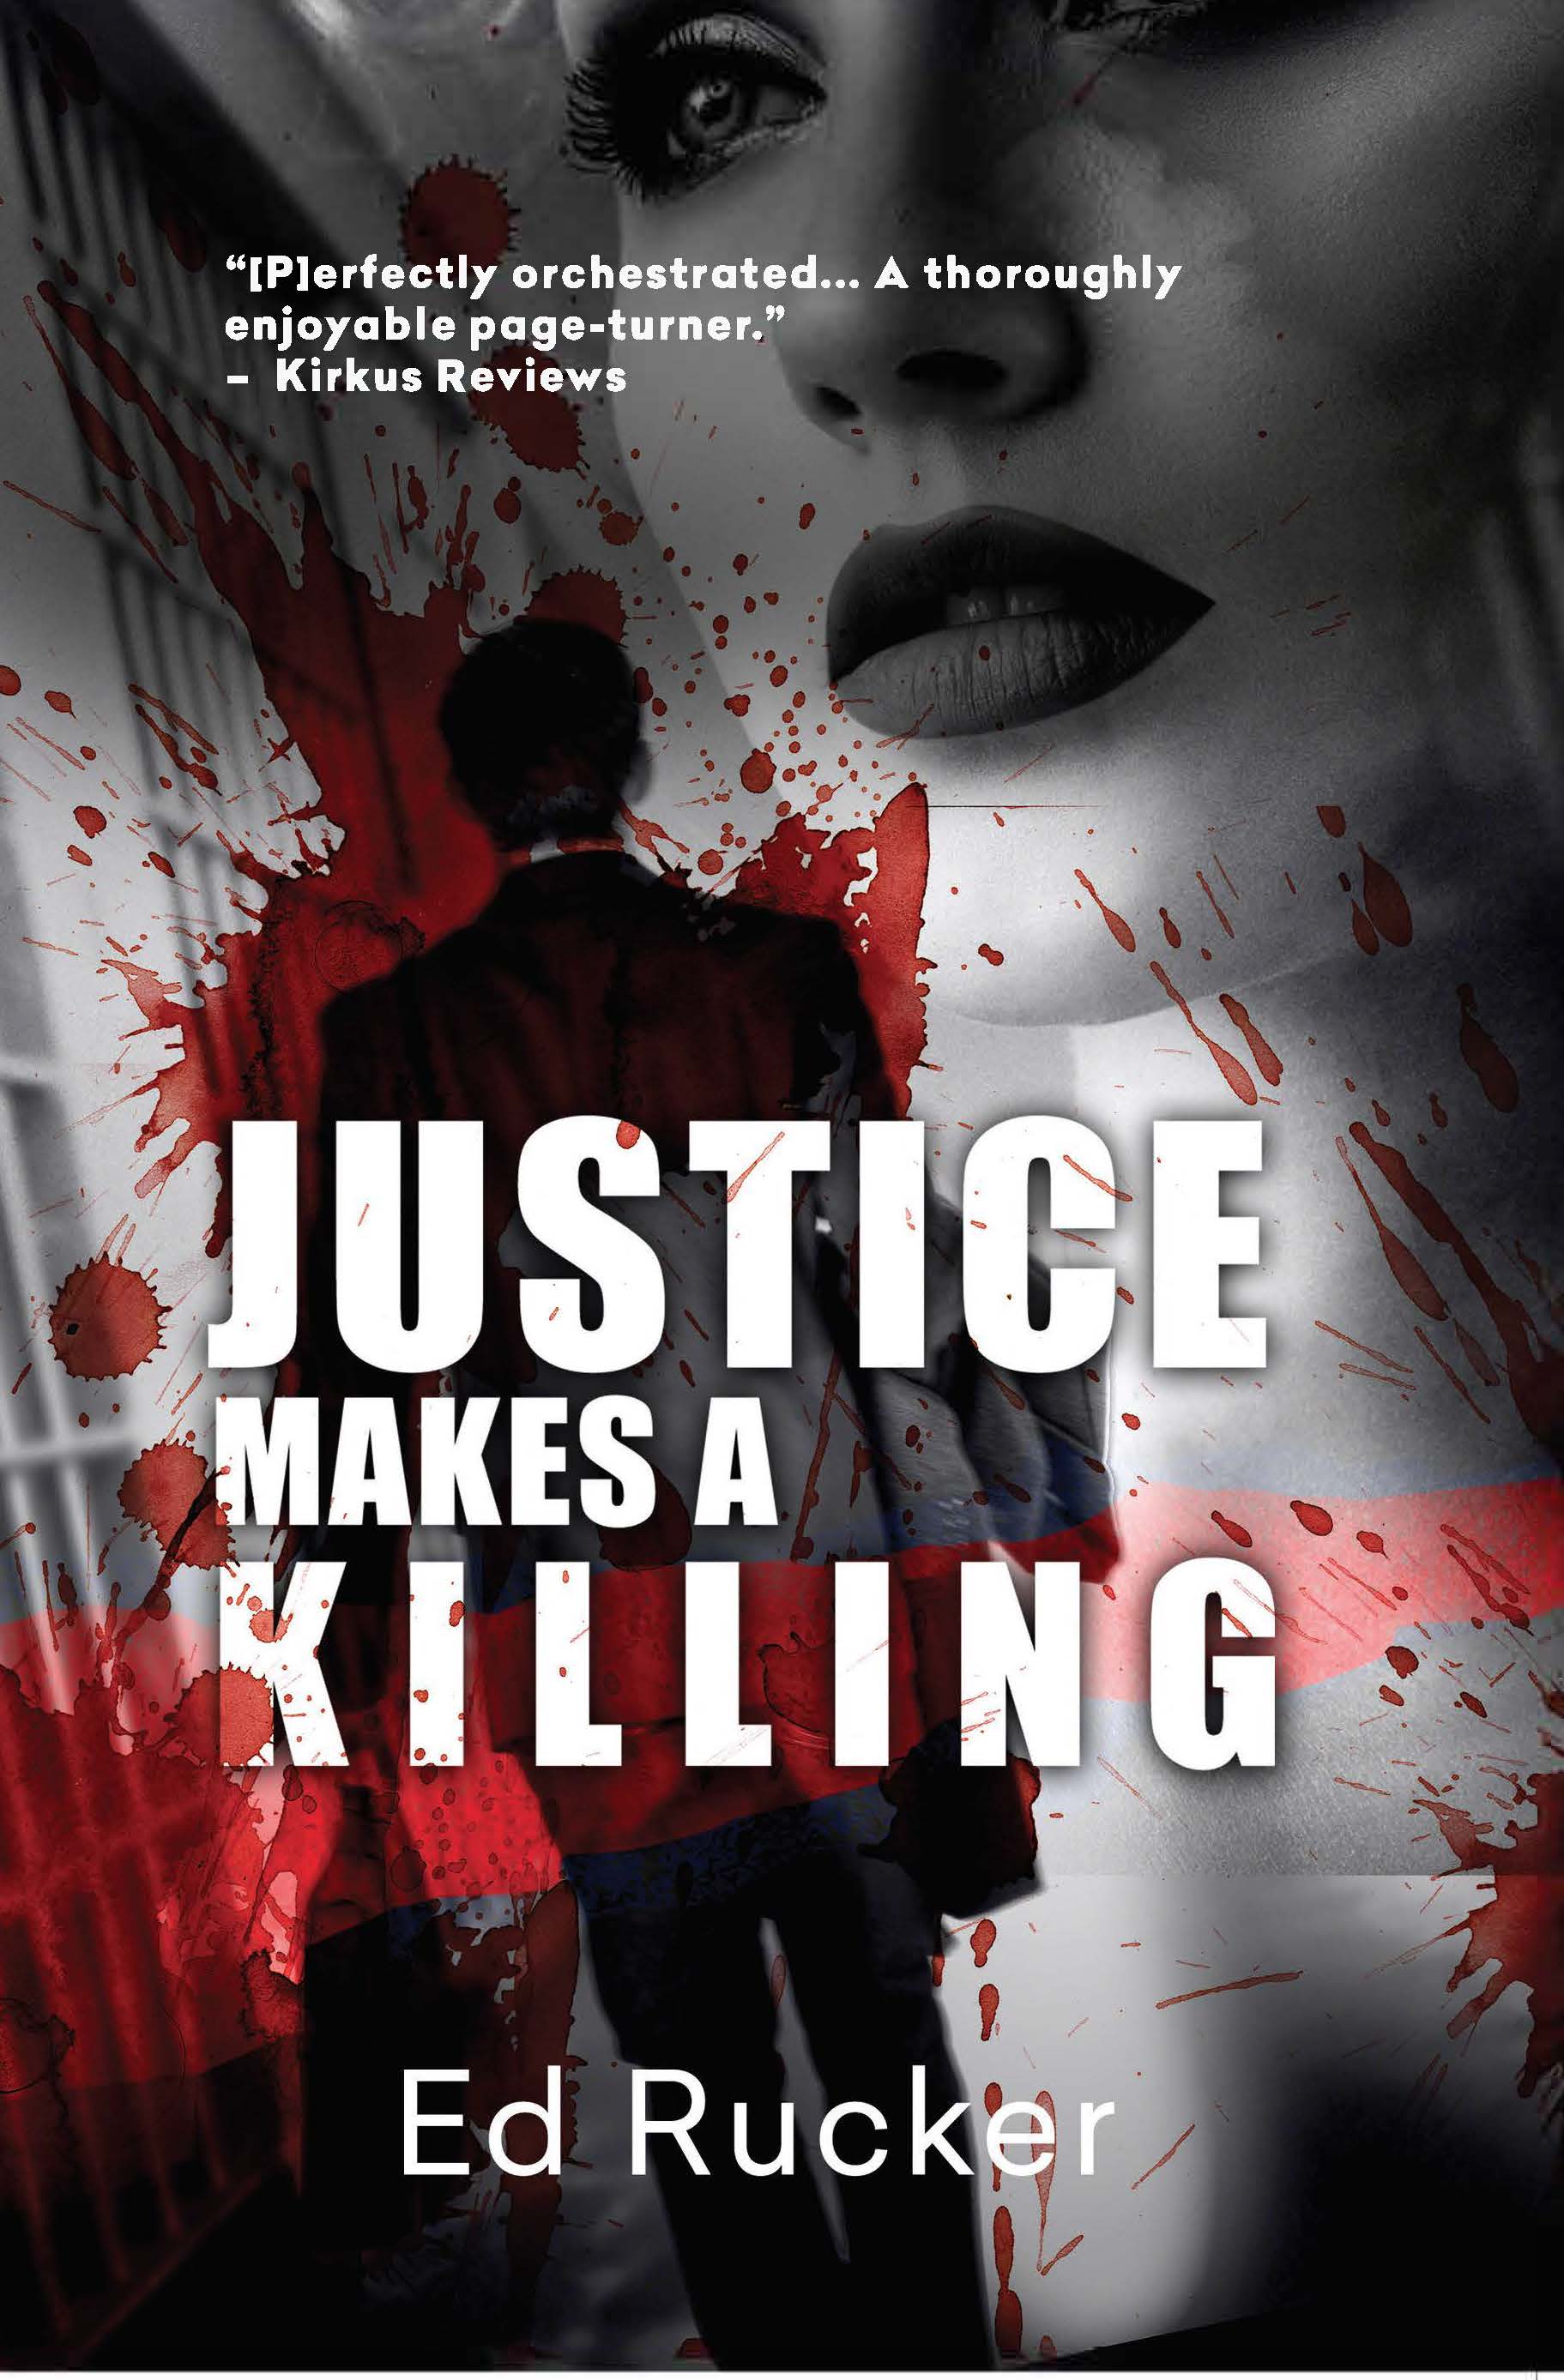 JusticeMakesAKilling Cover for Magazines